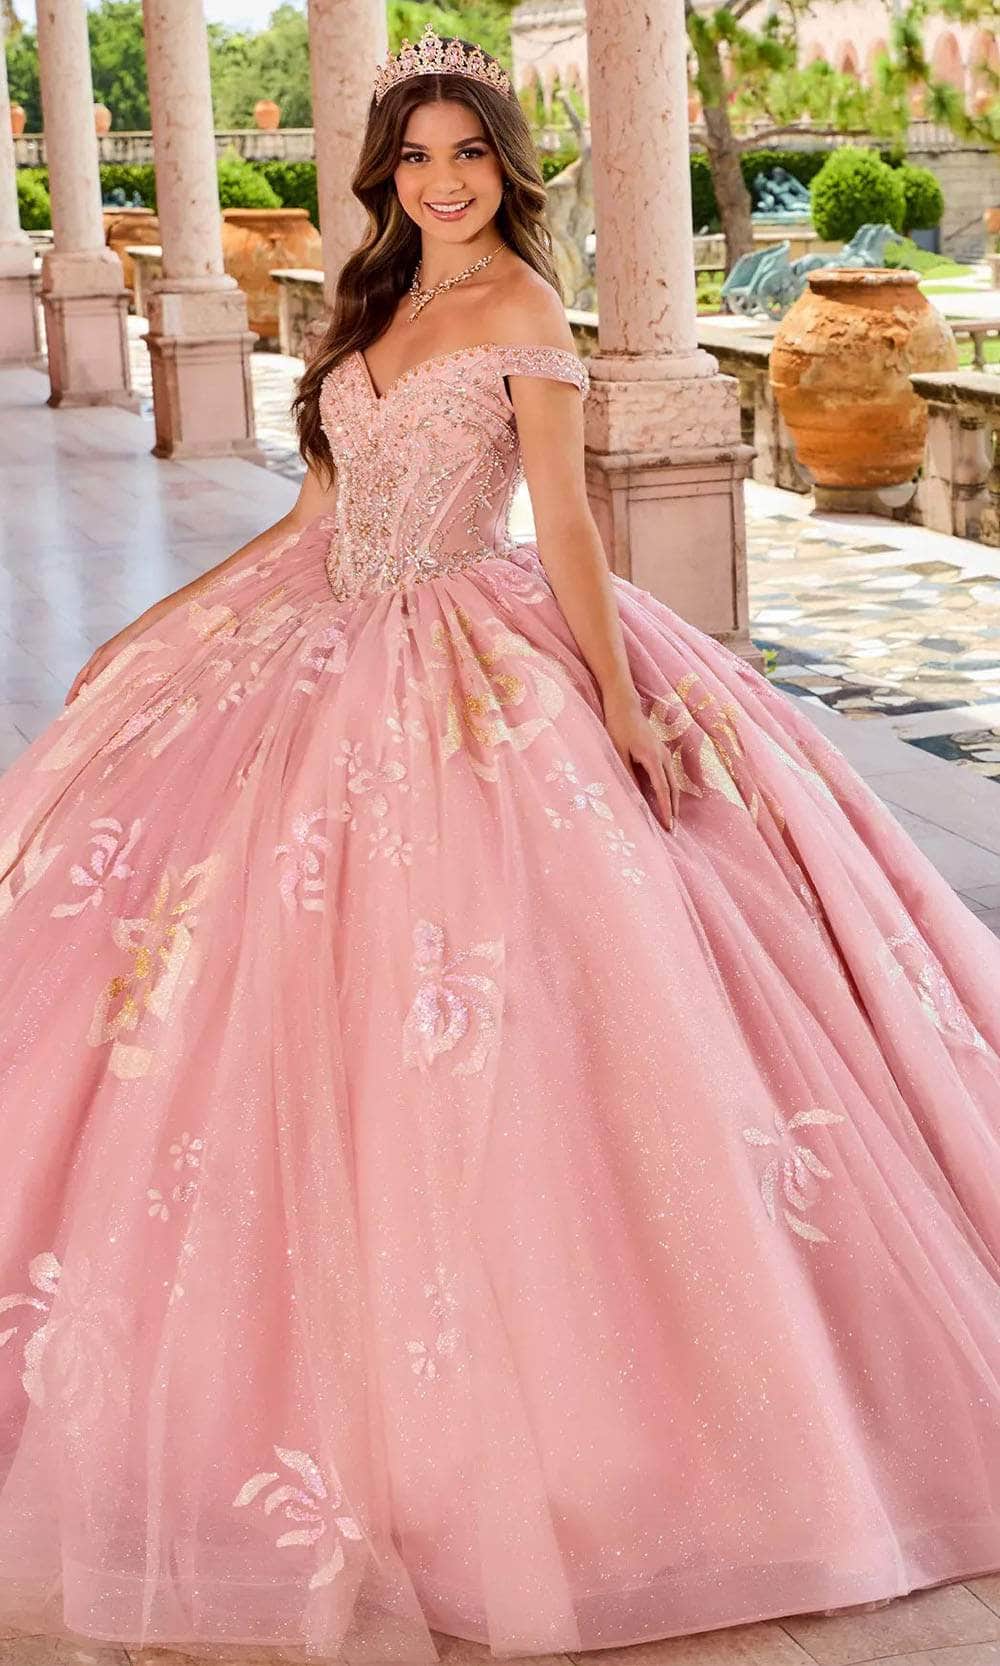 Princesa by Ariana Vara PR30156 - Off-Shoulder Sequined Prom Gown
